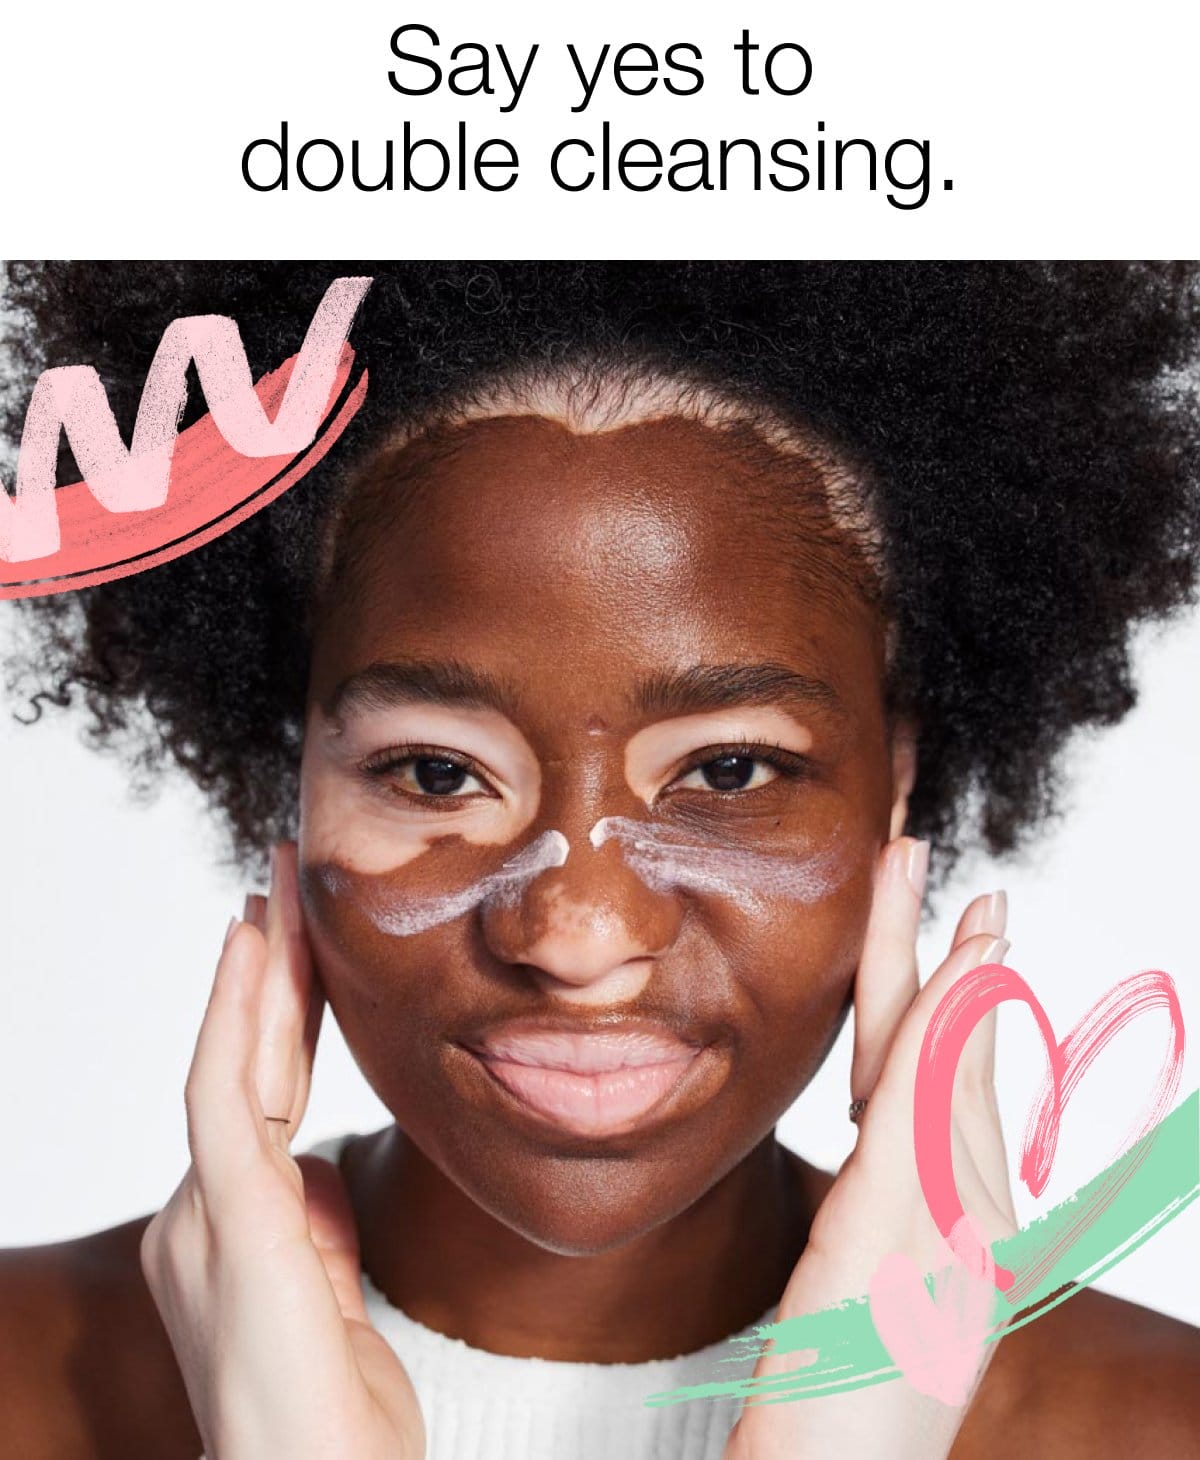 Say yes to double cleansing.